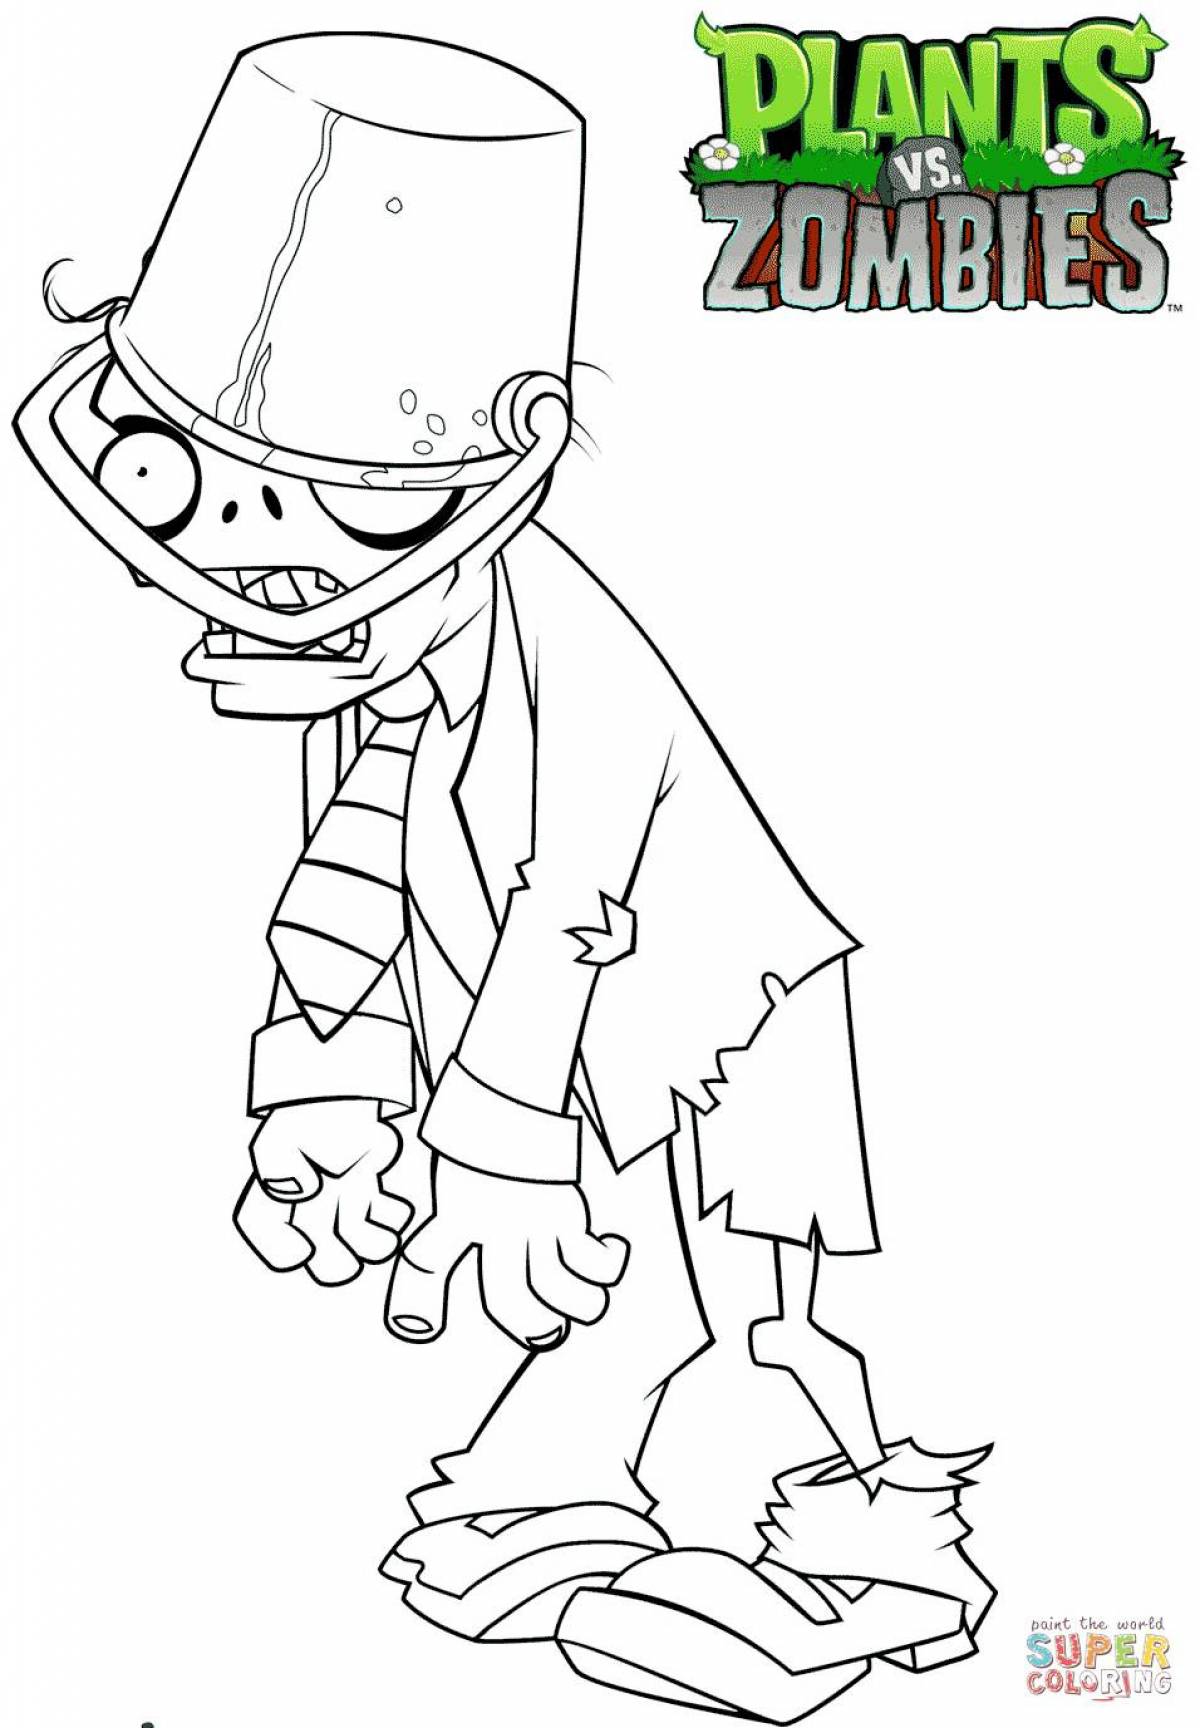 Ugly zombie coloring book